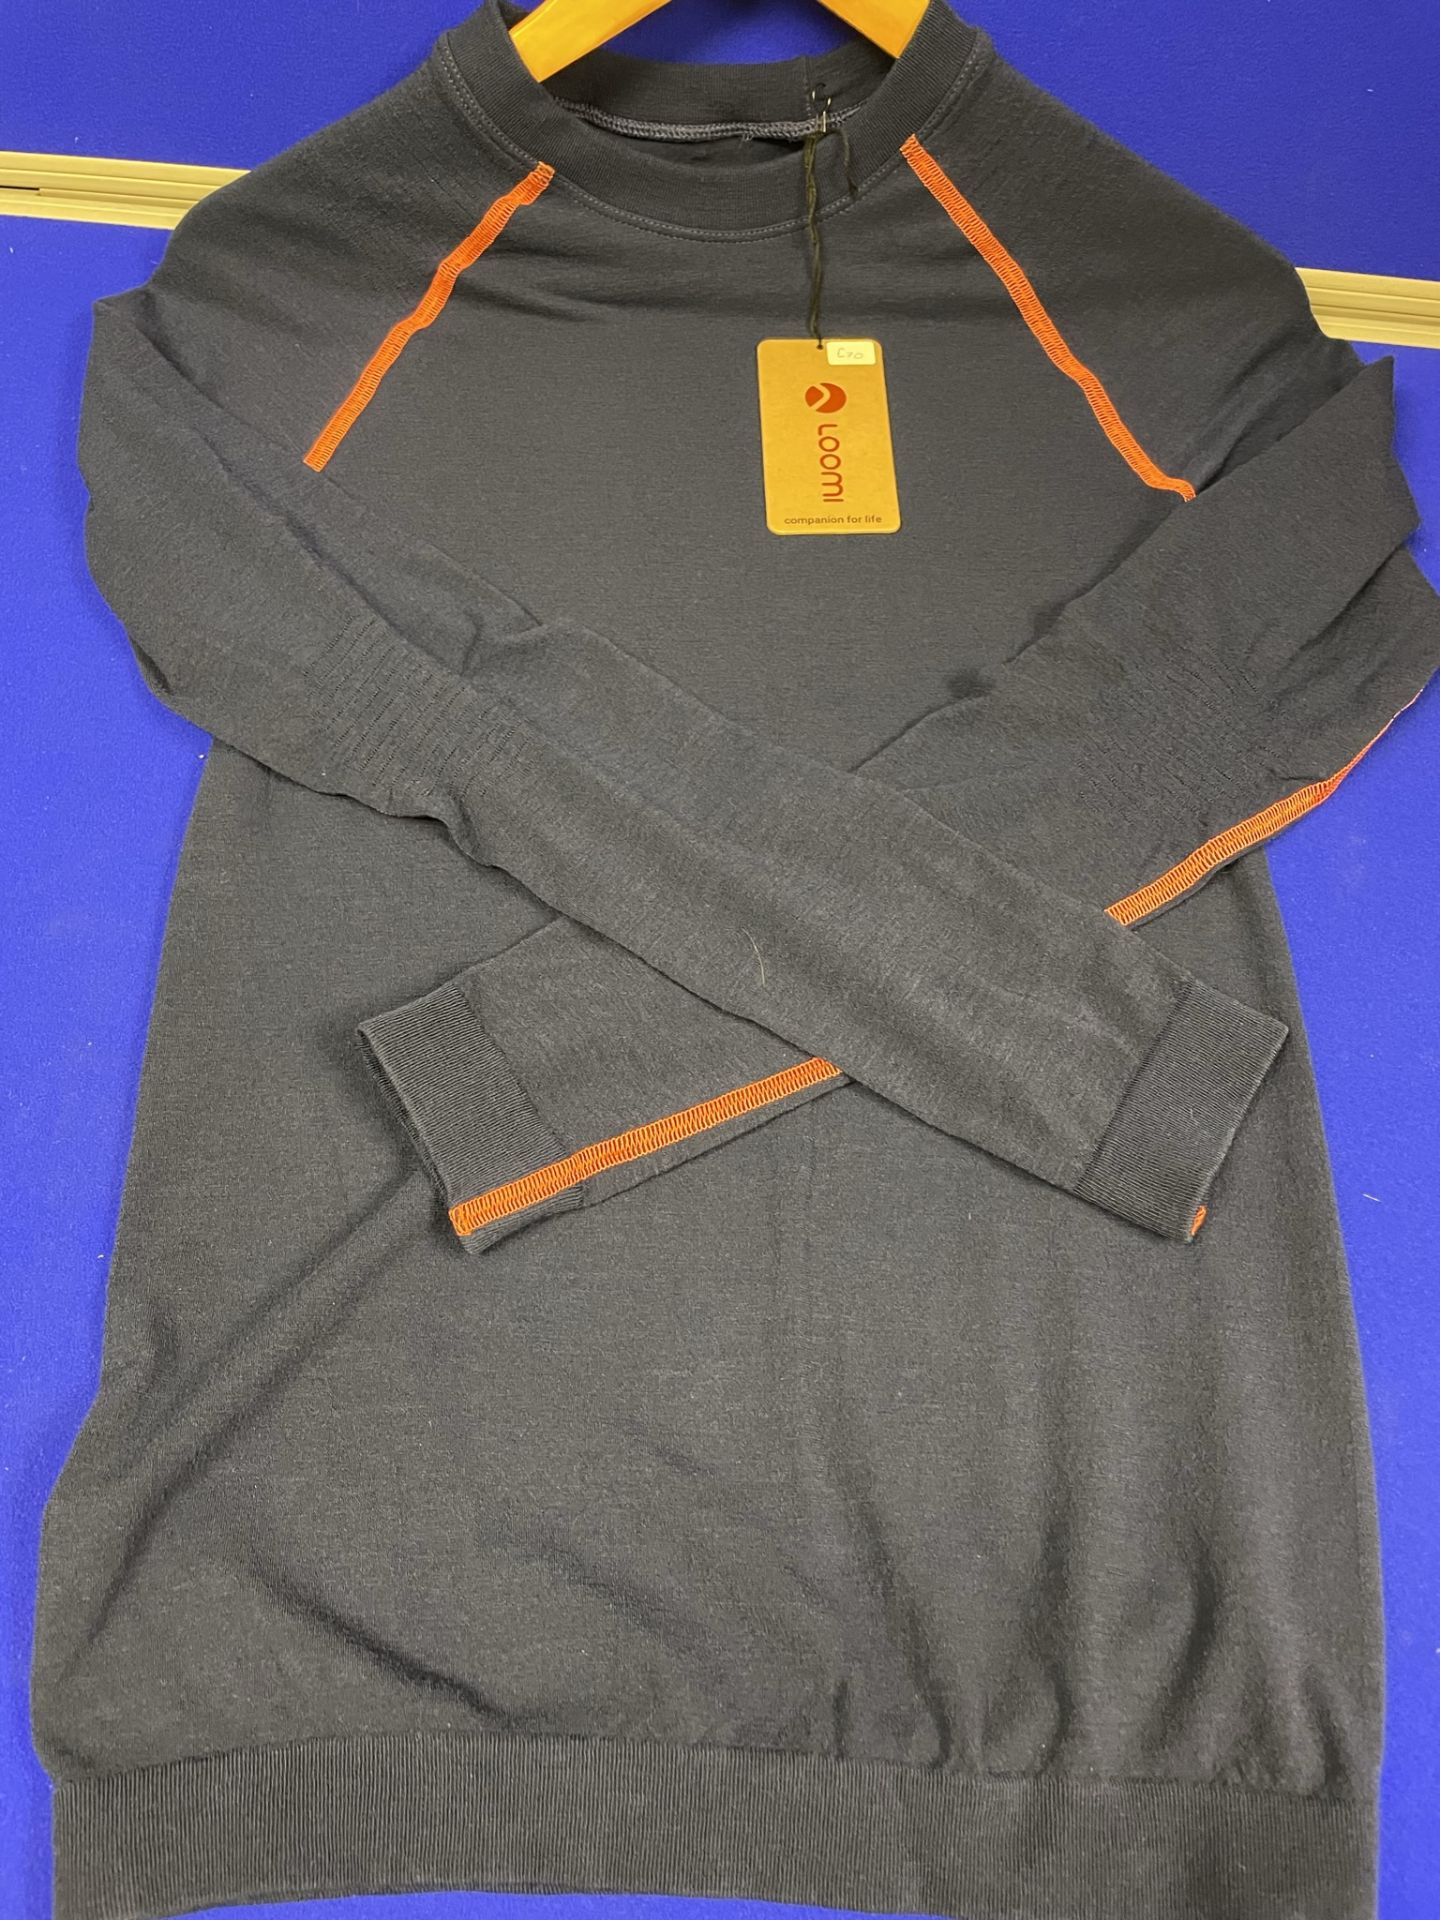 3 x Sports Tops/Jackets - Image 8 of 9